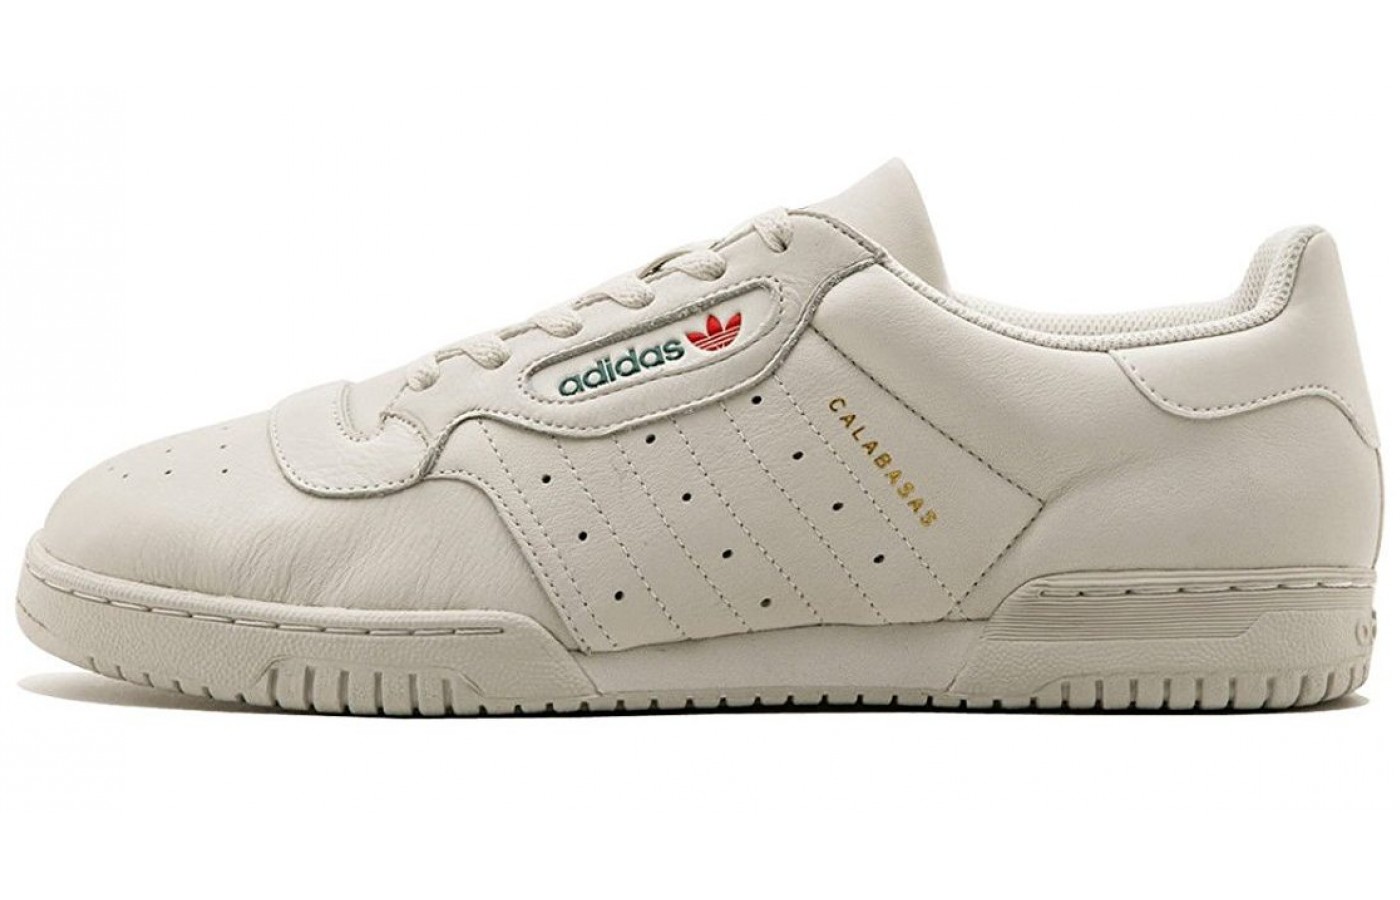 Adidas Yeezy Powerphase Reviewed 